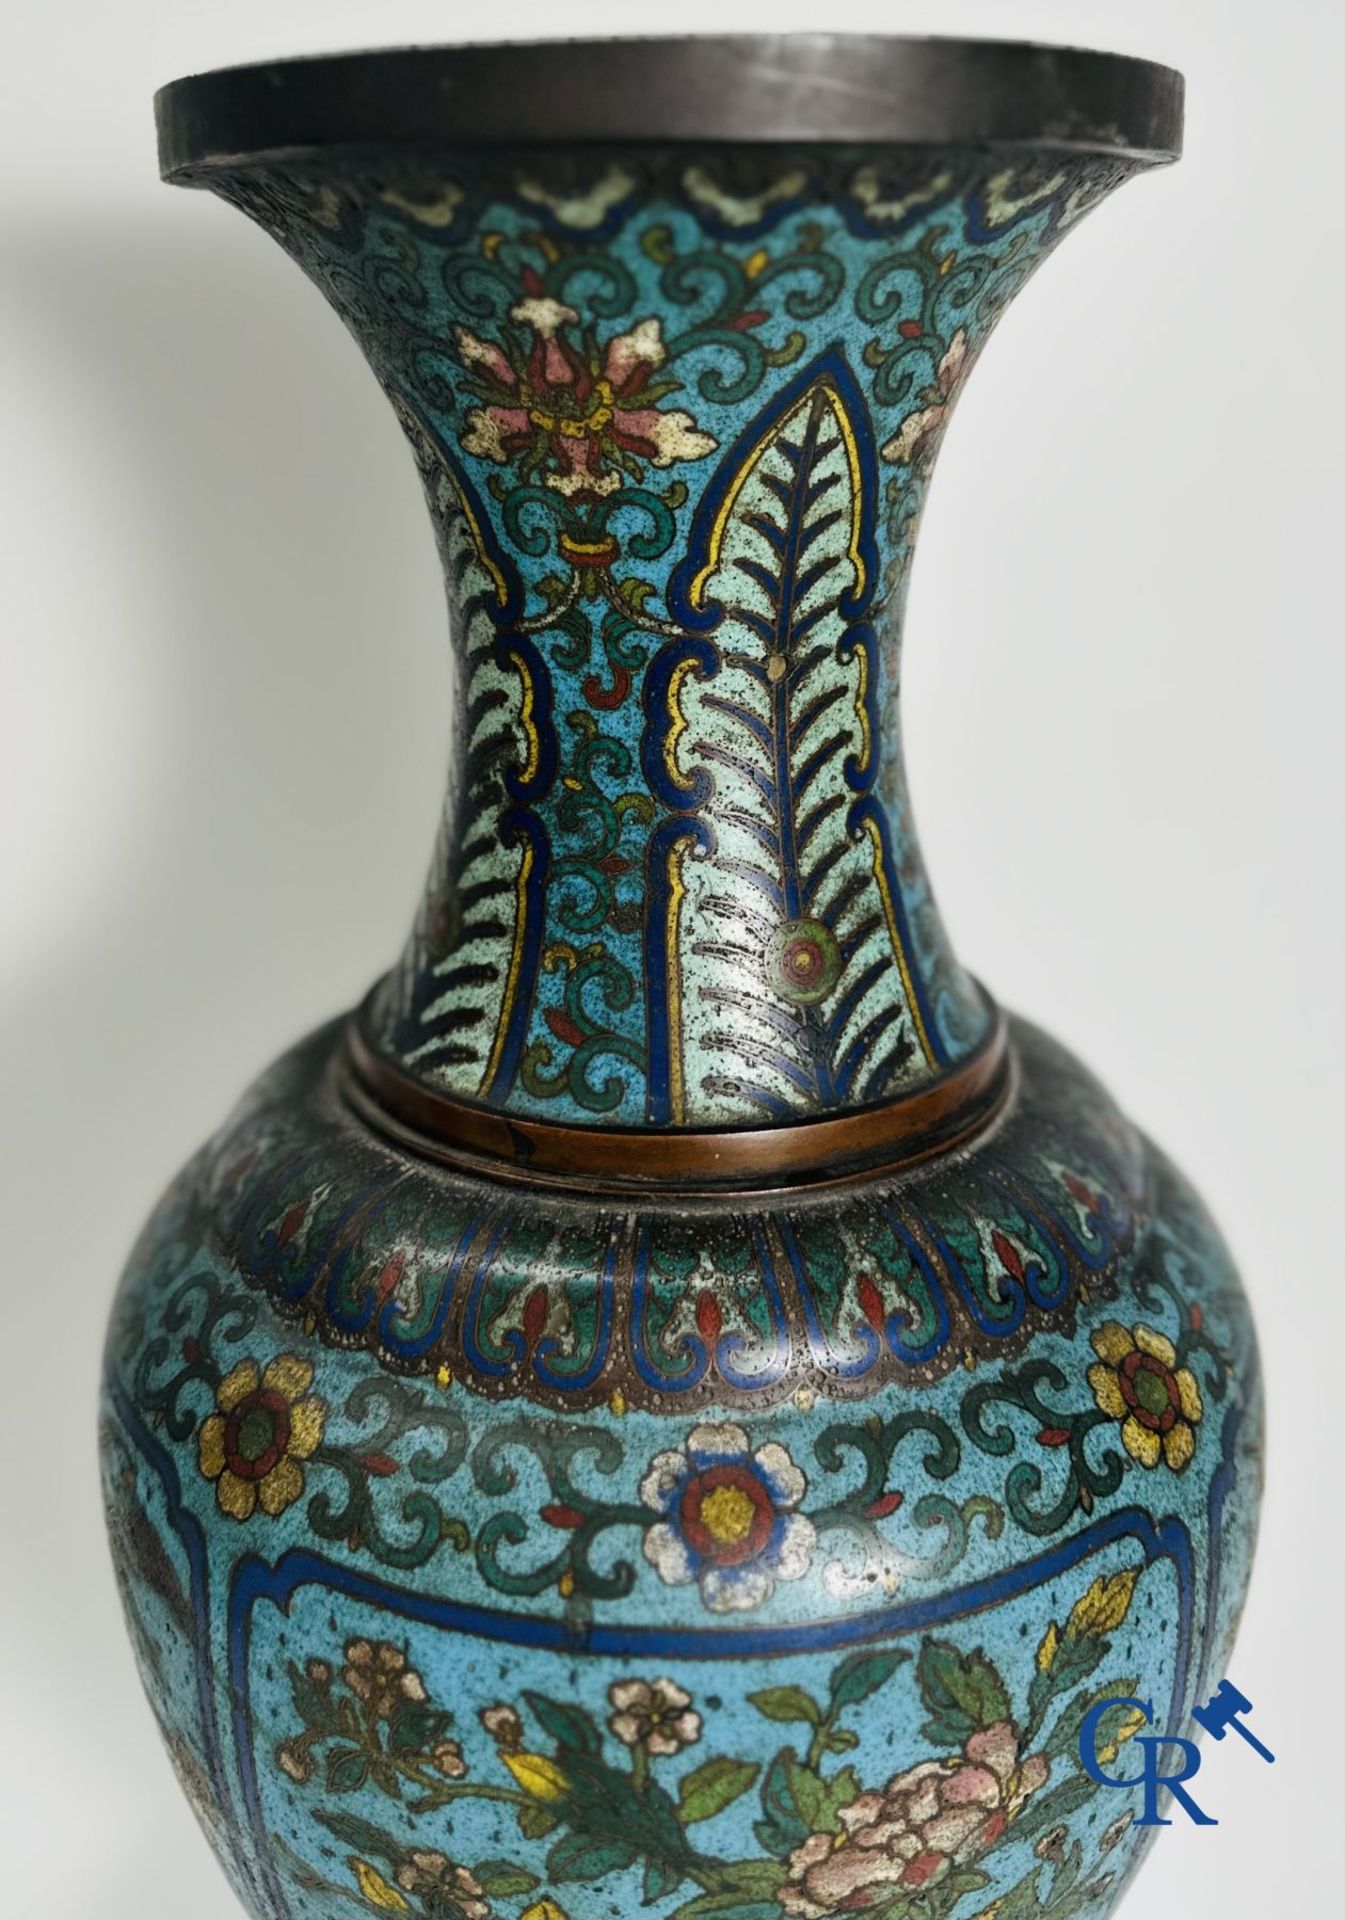 Chinese baluster-shaped vase in bronze and cloisonné. 19th century. - Image 6 of 9